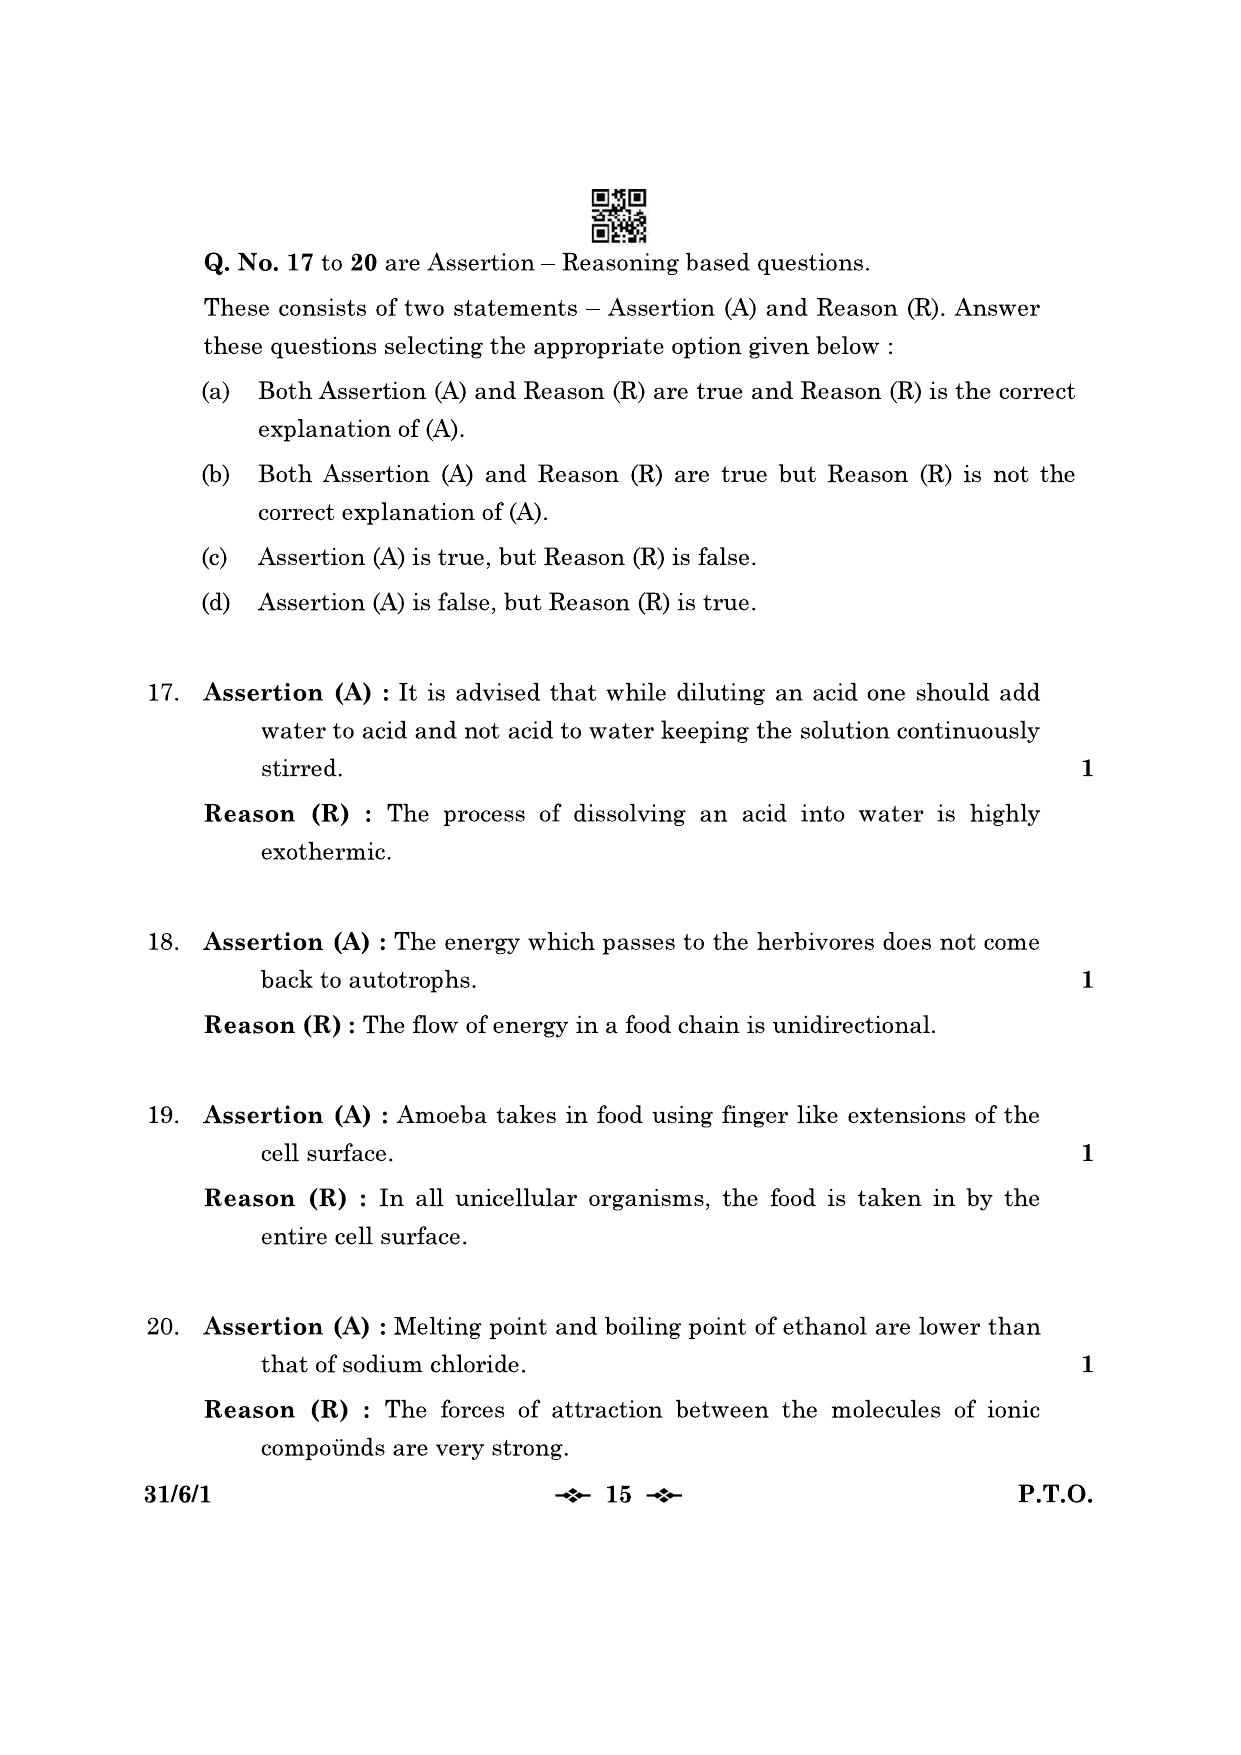 CBSE Class 10 31-6-1 Science 2023 Question Paper - Page 15